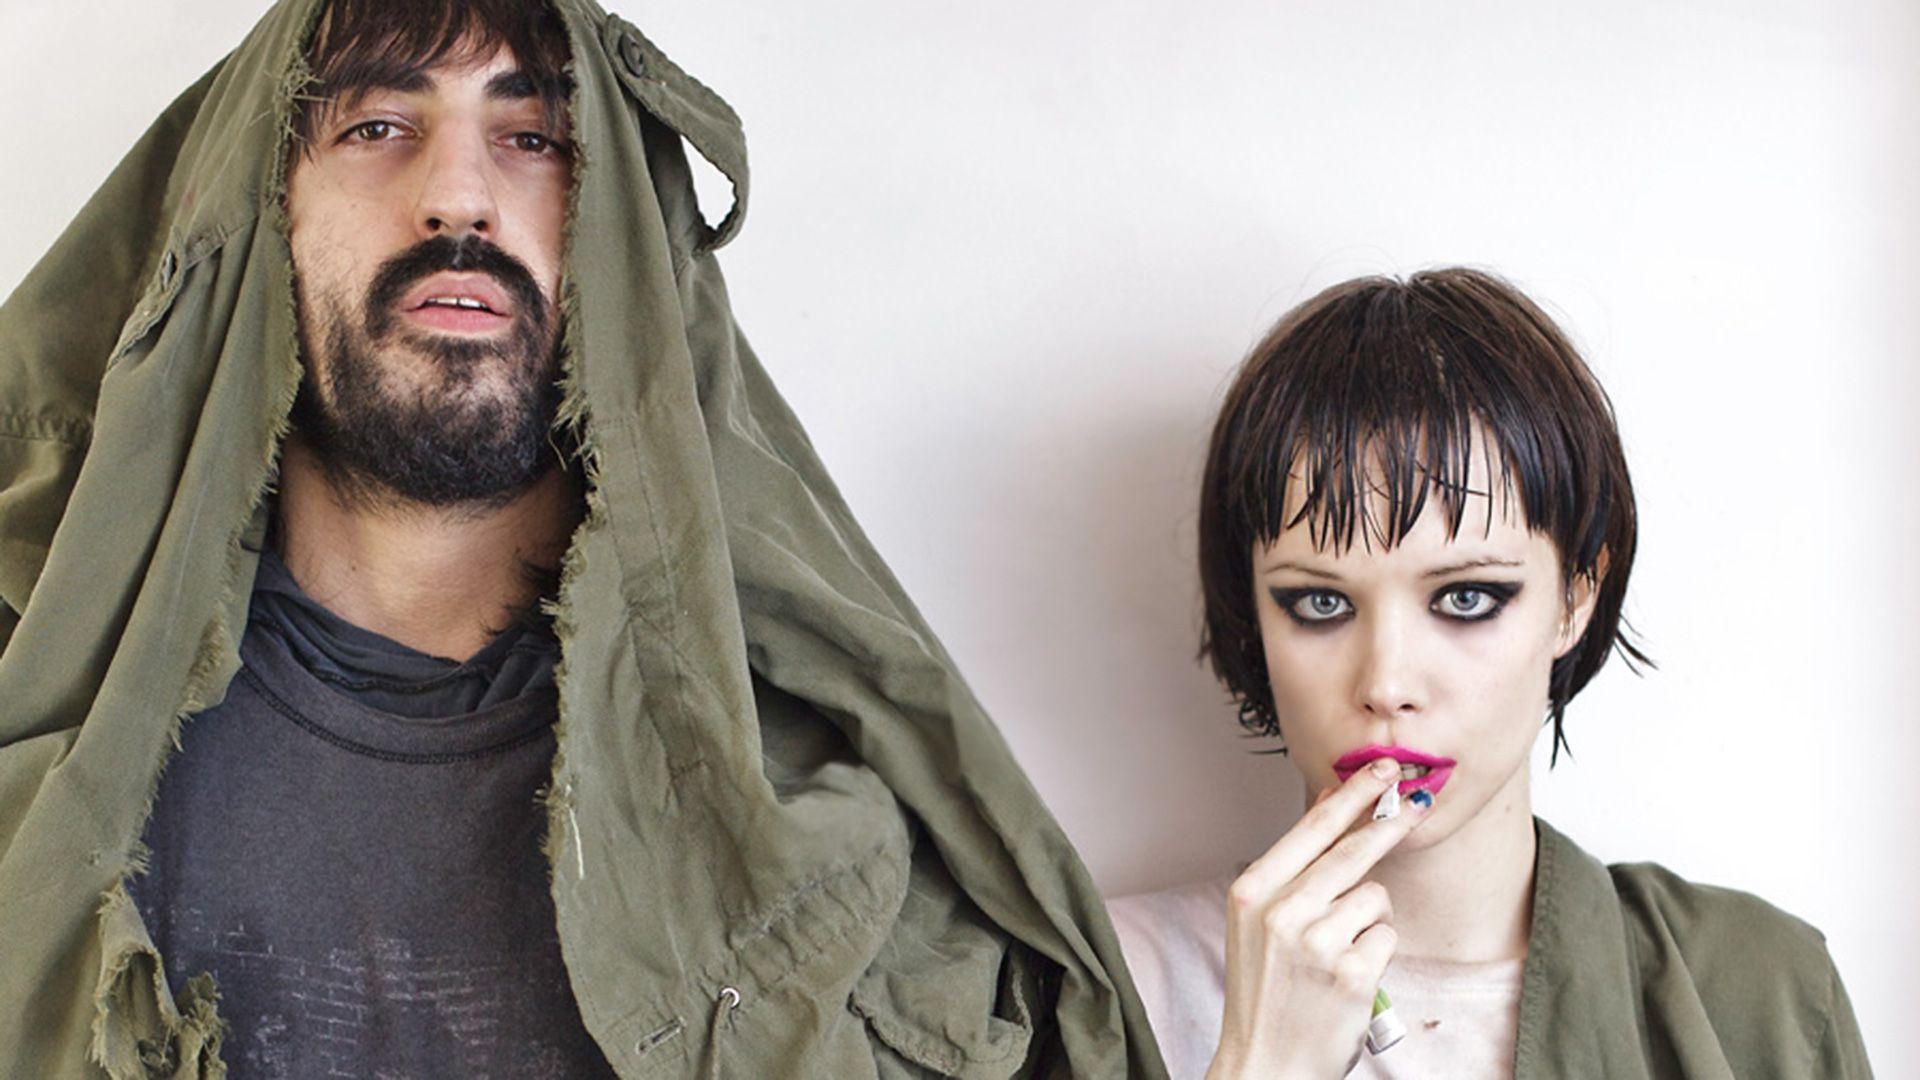 Crystal Castles Split Up With Alice Glass Going Solo. Music News